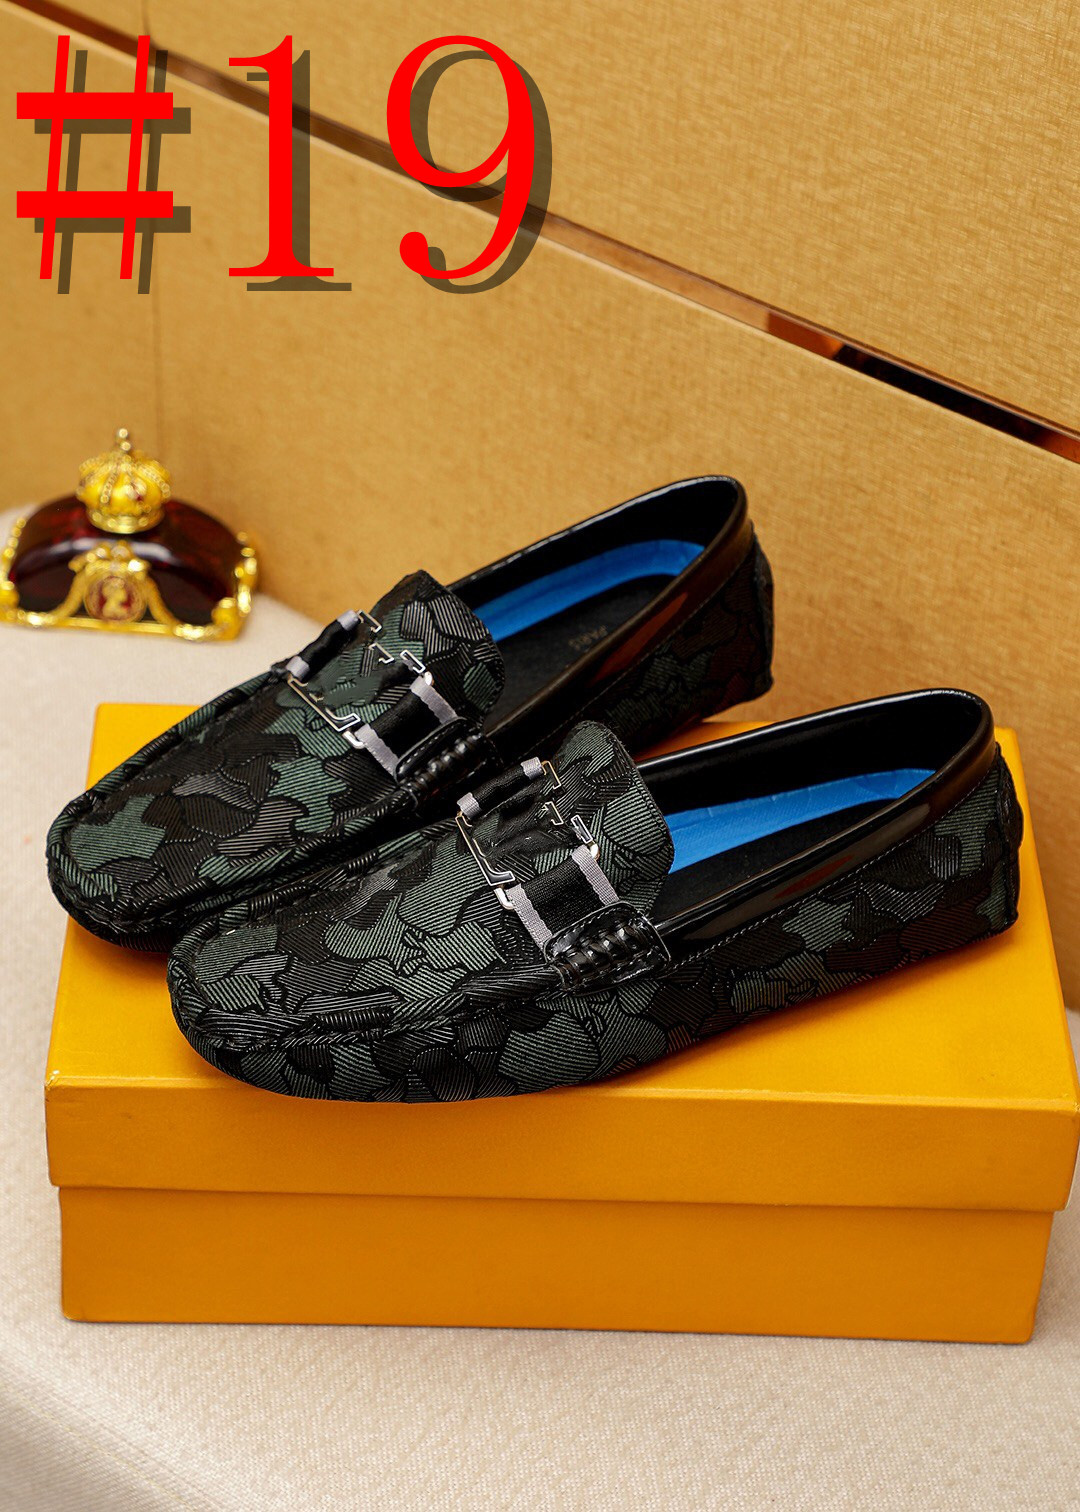 39MODEL 2024 Fashion Young Casual Designer Loafers Shoes Large Size 46 Luxury Patent Leather Handmade Men Shoes Rubber Non-Slip Driving Men Footwear